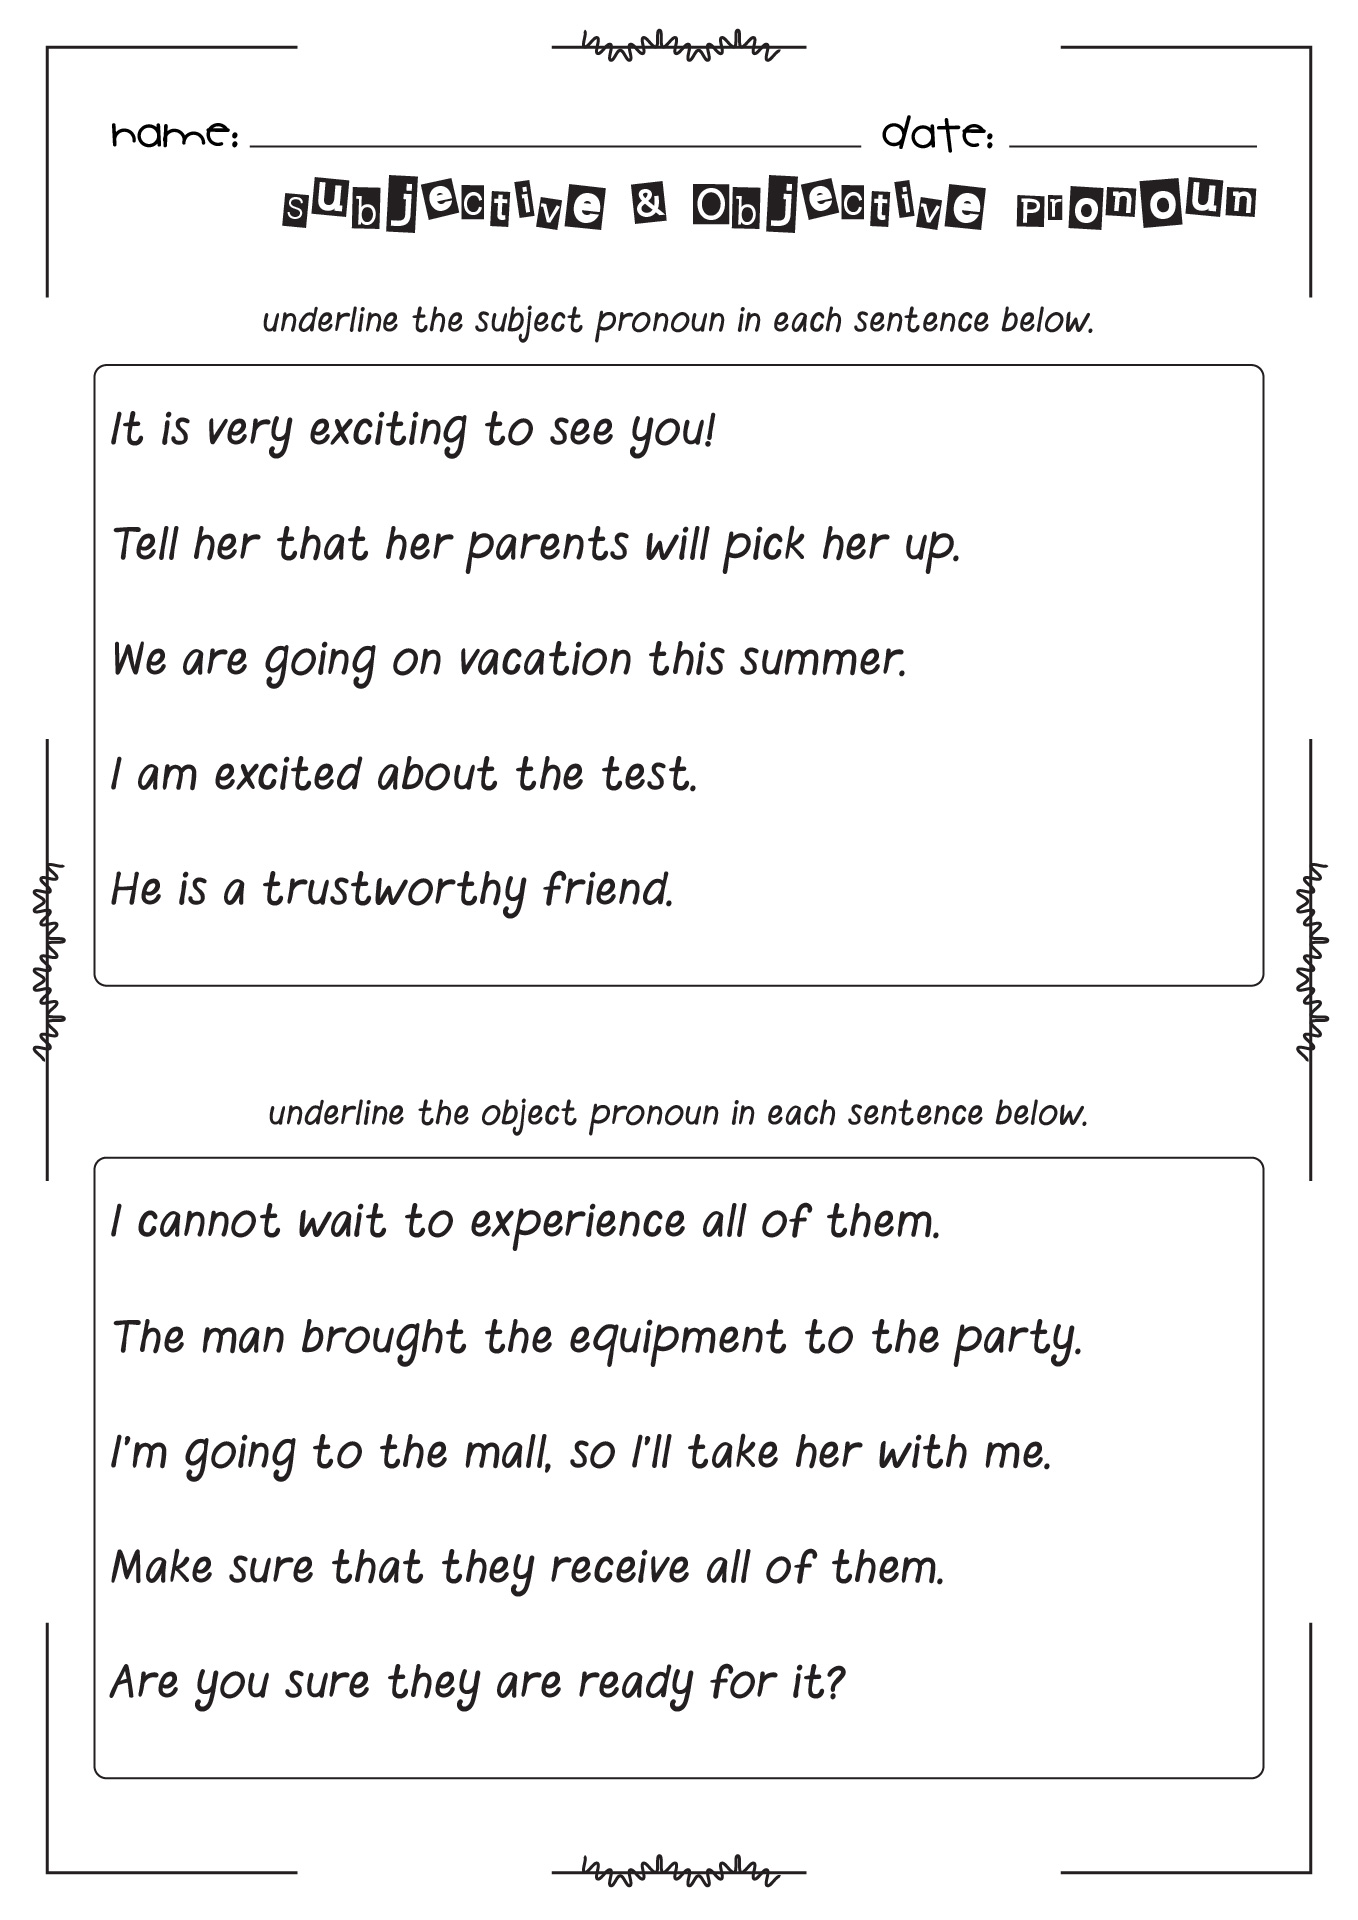 11-best-images-of-spanish-subject-pronouns-worksheet-pronoun-worksheets-he-she-they-intensive